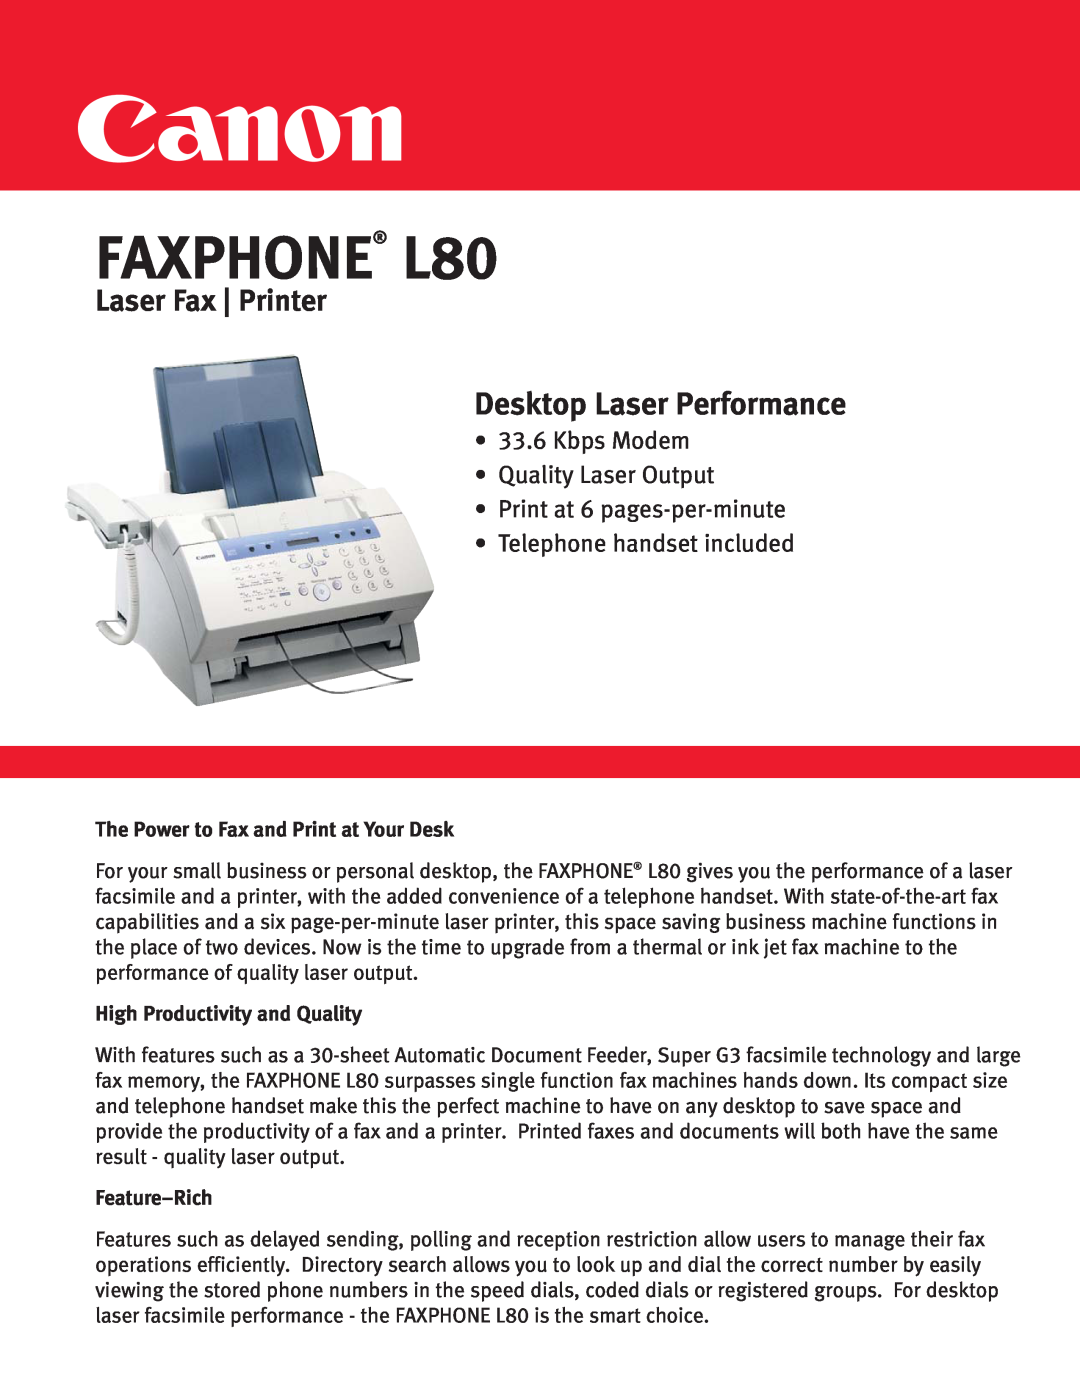 Canon manual The Power to Fax and Print at Your Desk, High Productivity and Quality, Feature-Rich, FAXPHONE L80 